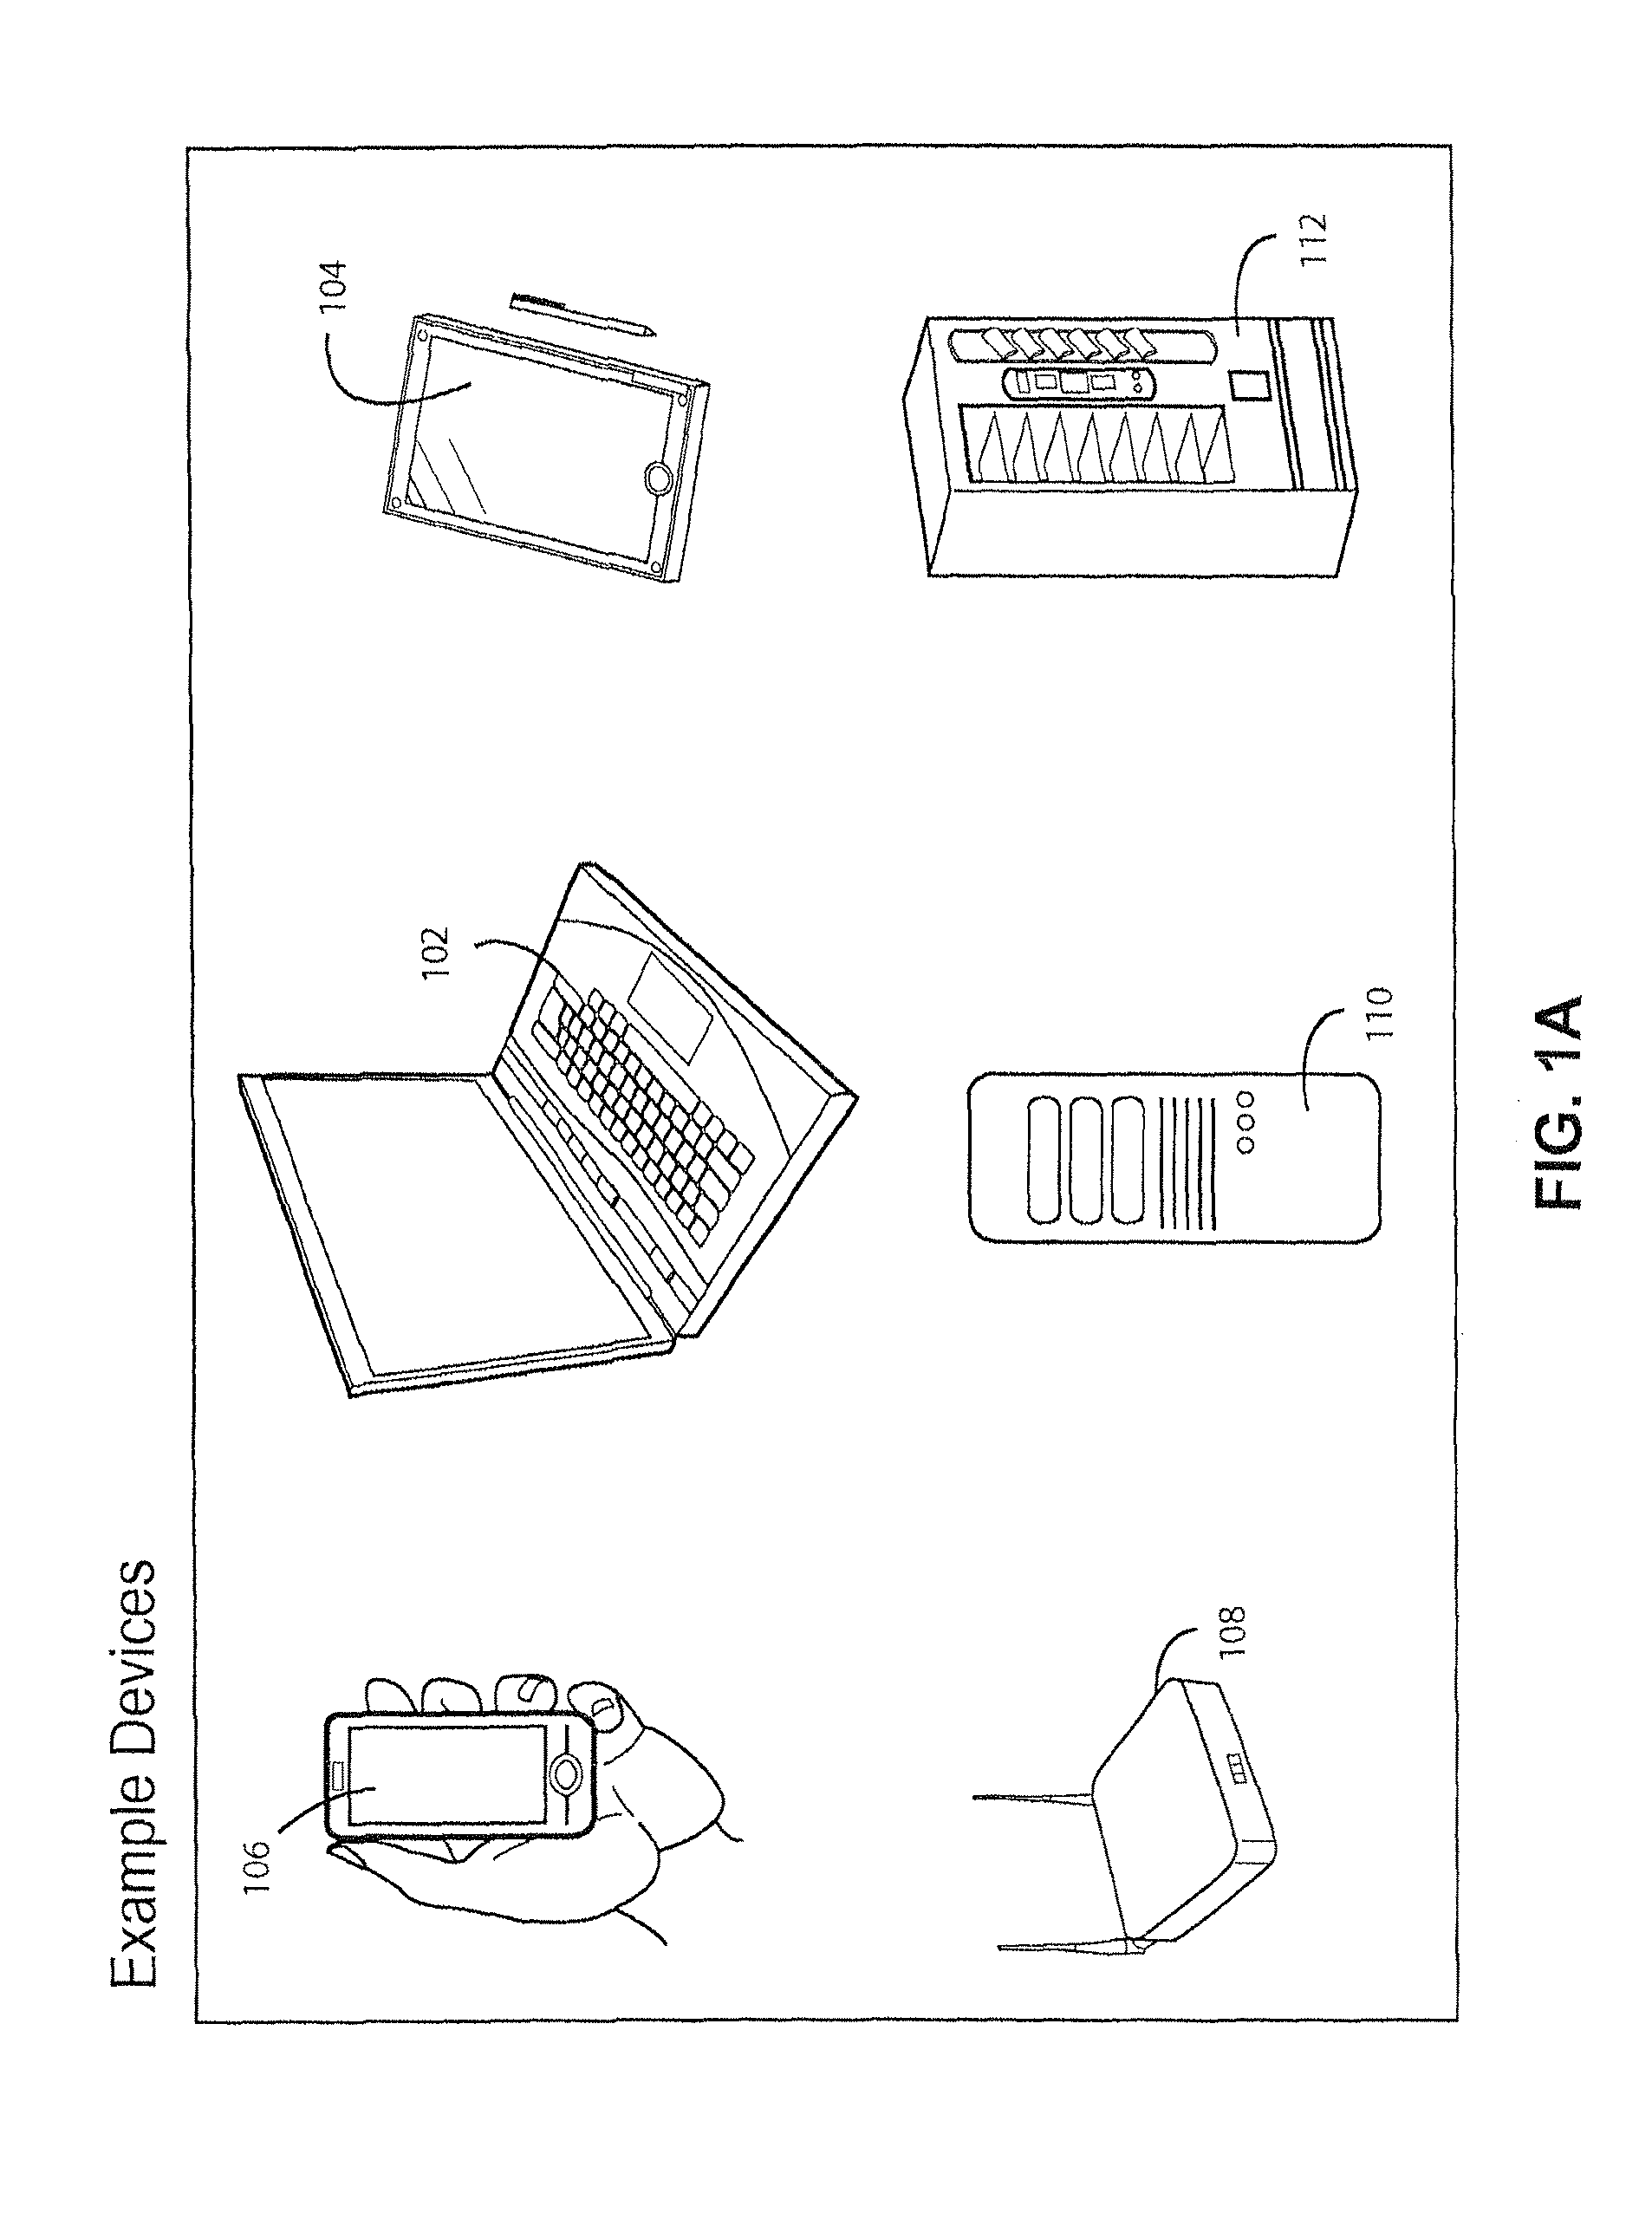 Systems and methods using one time pads during the exchange of cryptographic material